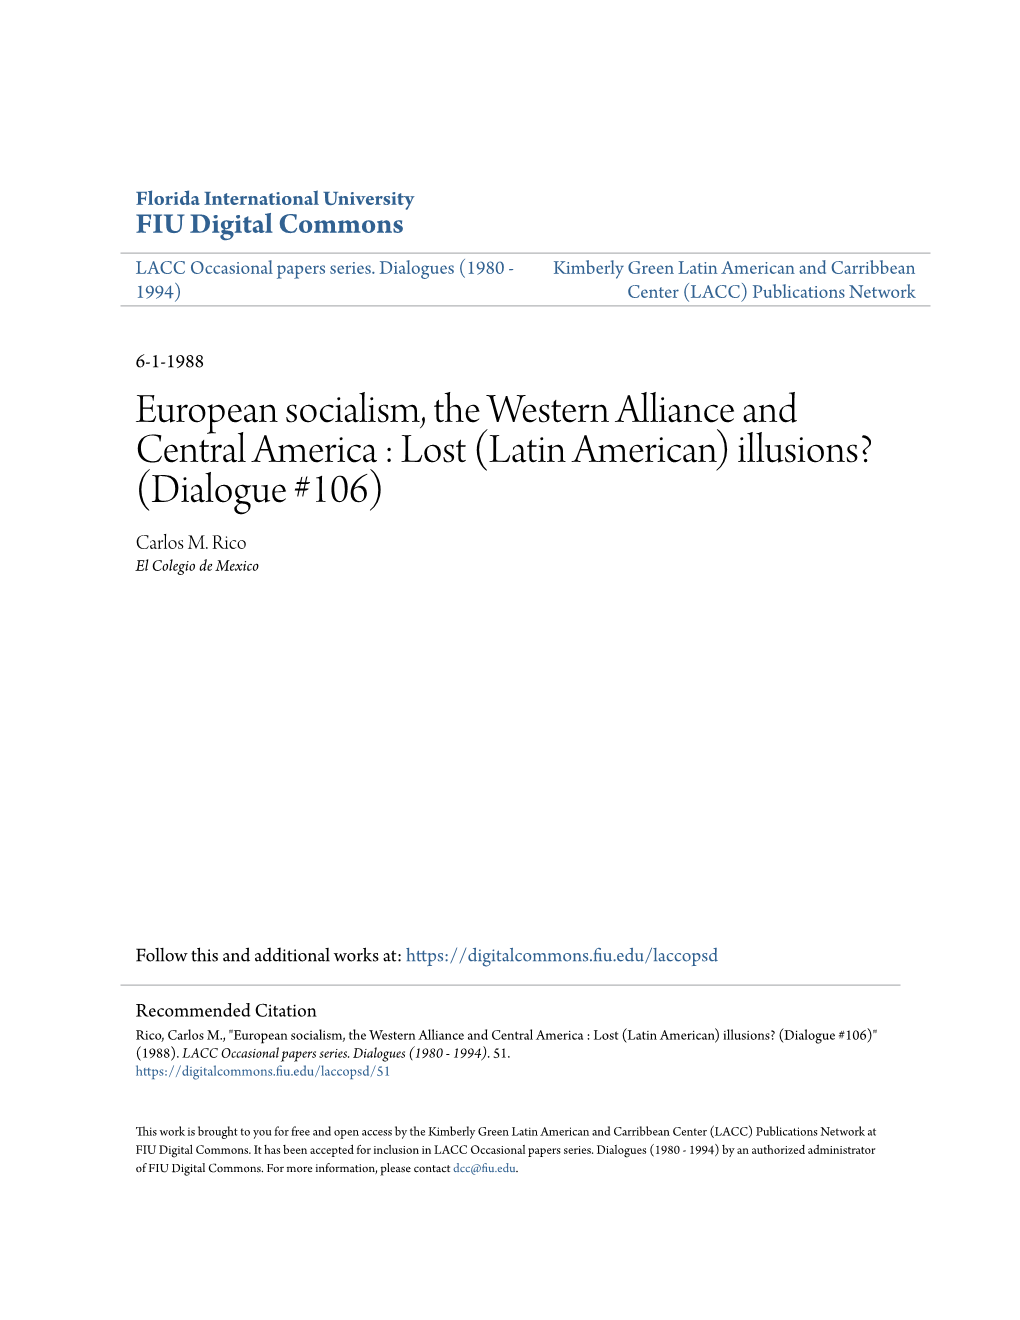 European Socialism, the Western Alliance and Central America : Lost (Latin American) Illusions? (Dialogue #106) Carlos M